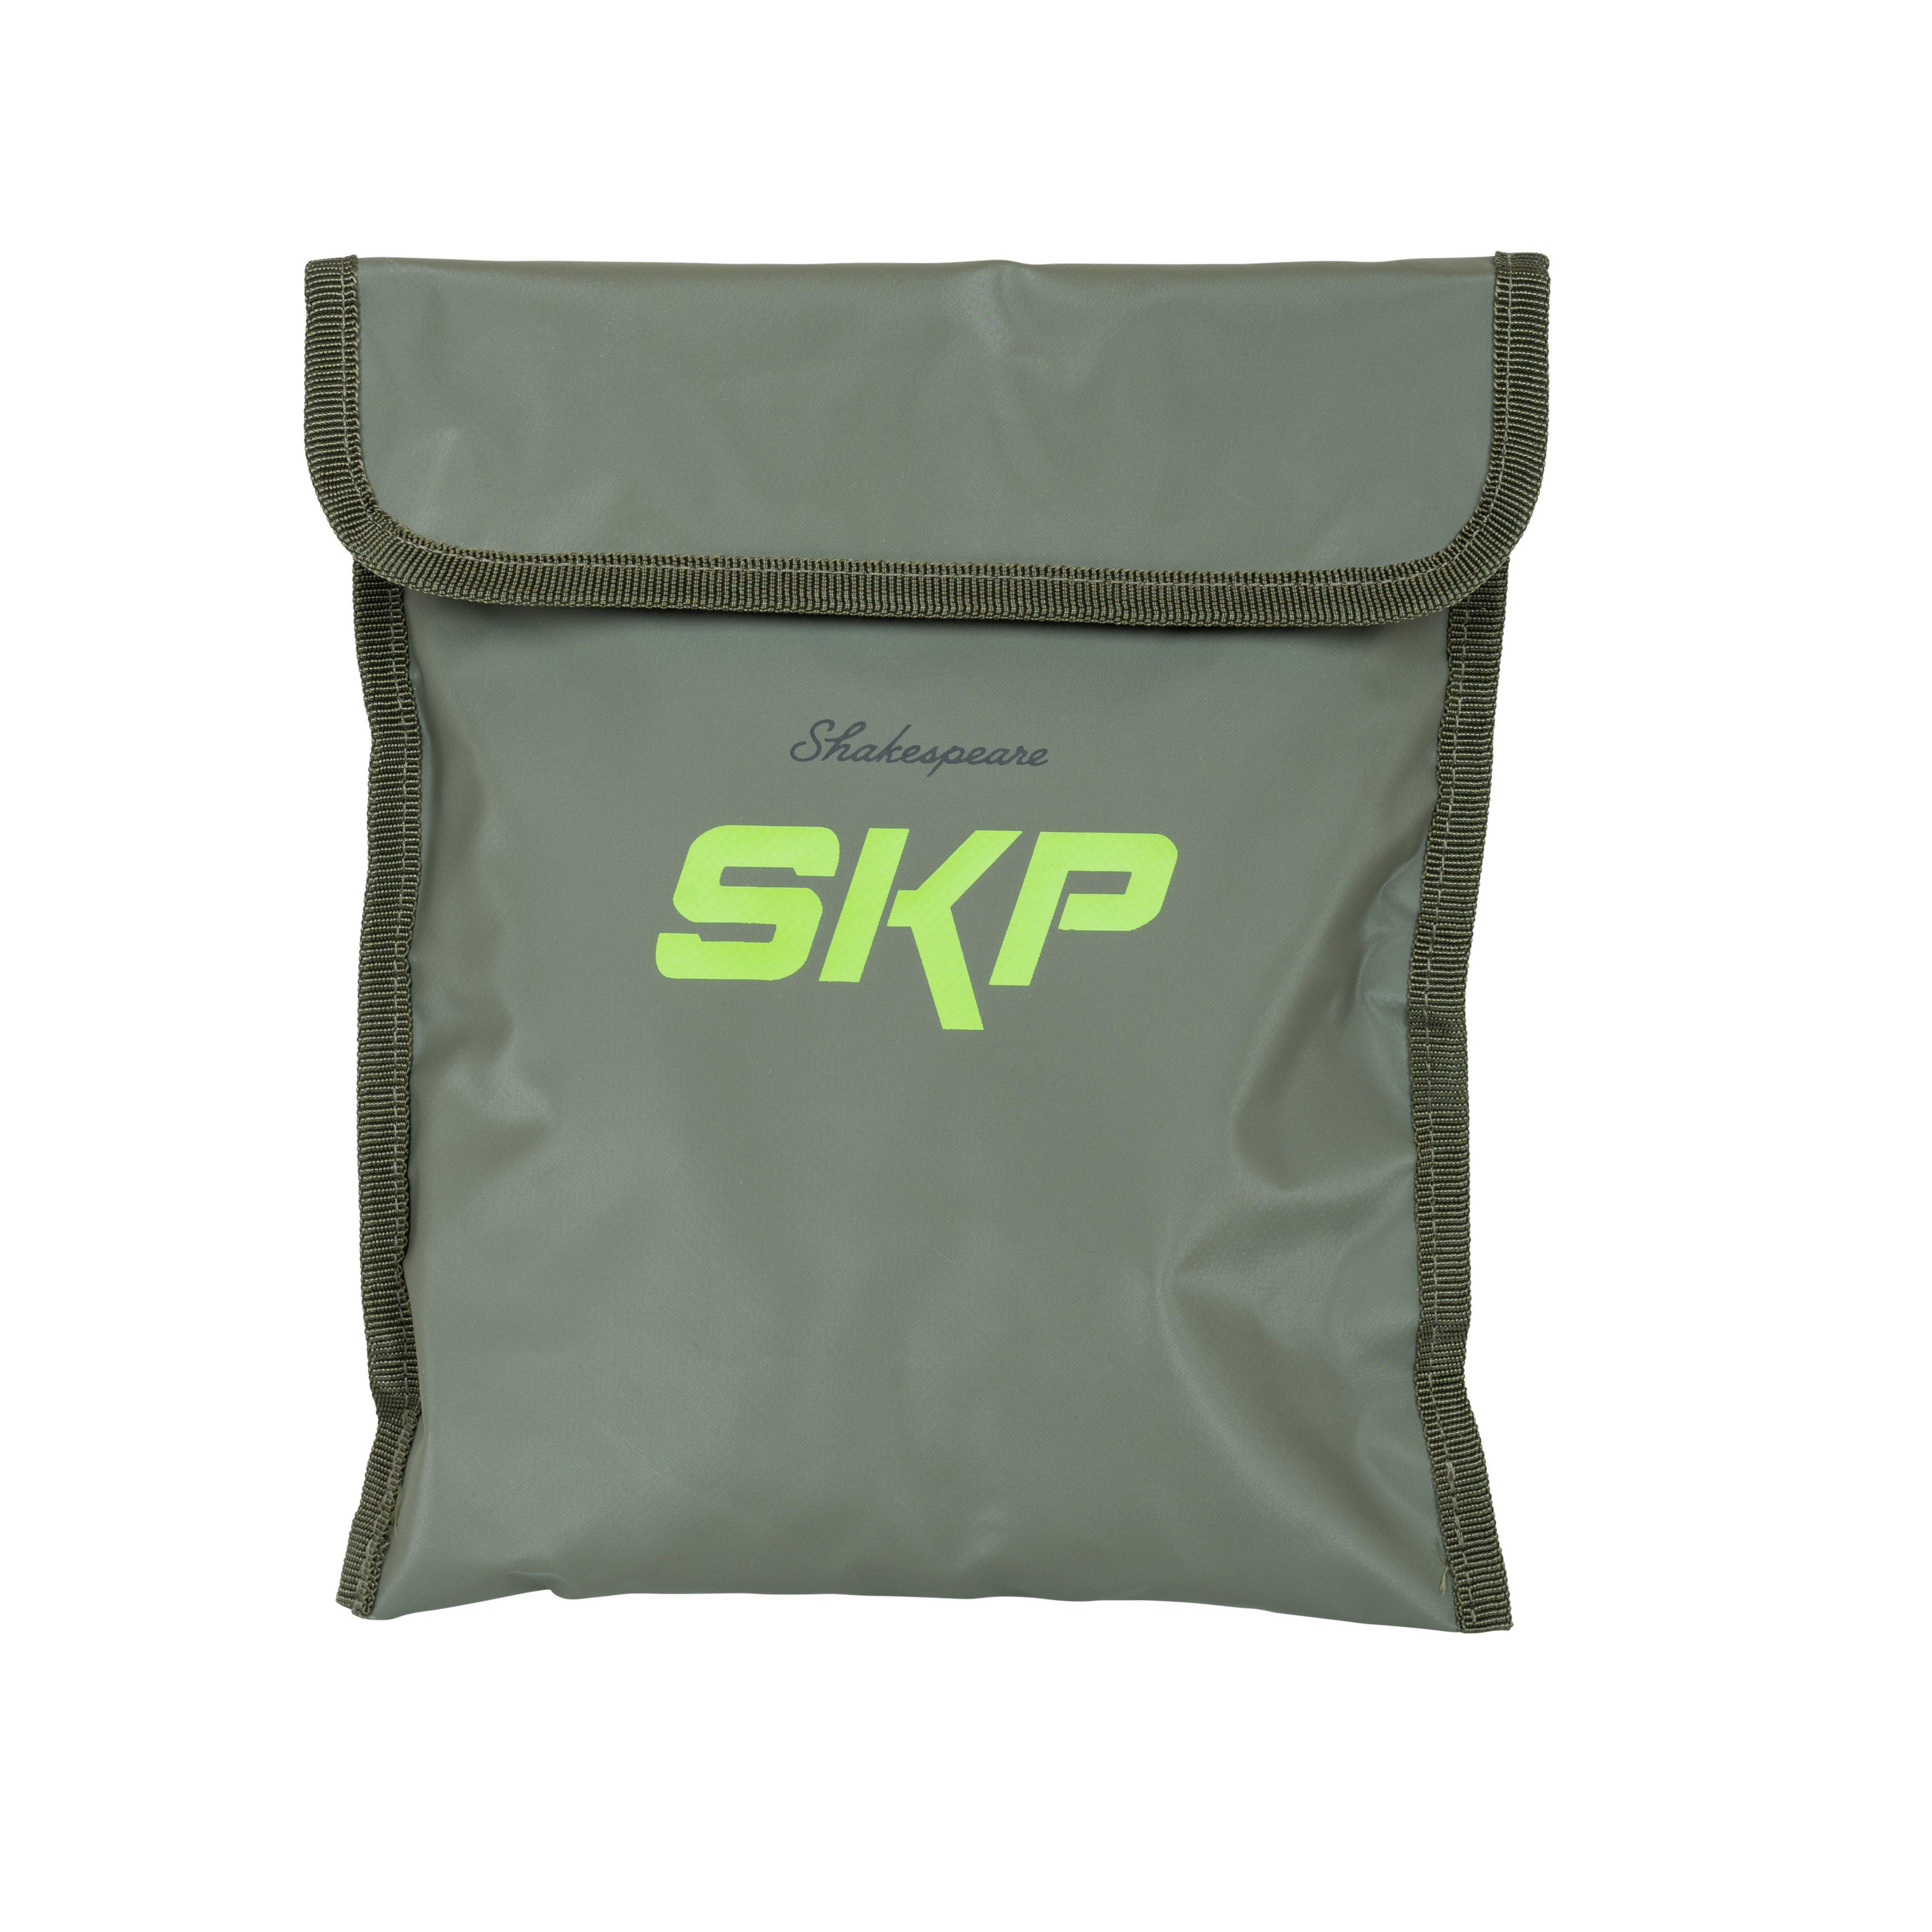 Shakespeare SKP Weigh and Retention Sling Weegzak - Weigh & Retention Sling M